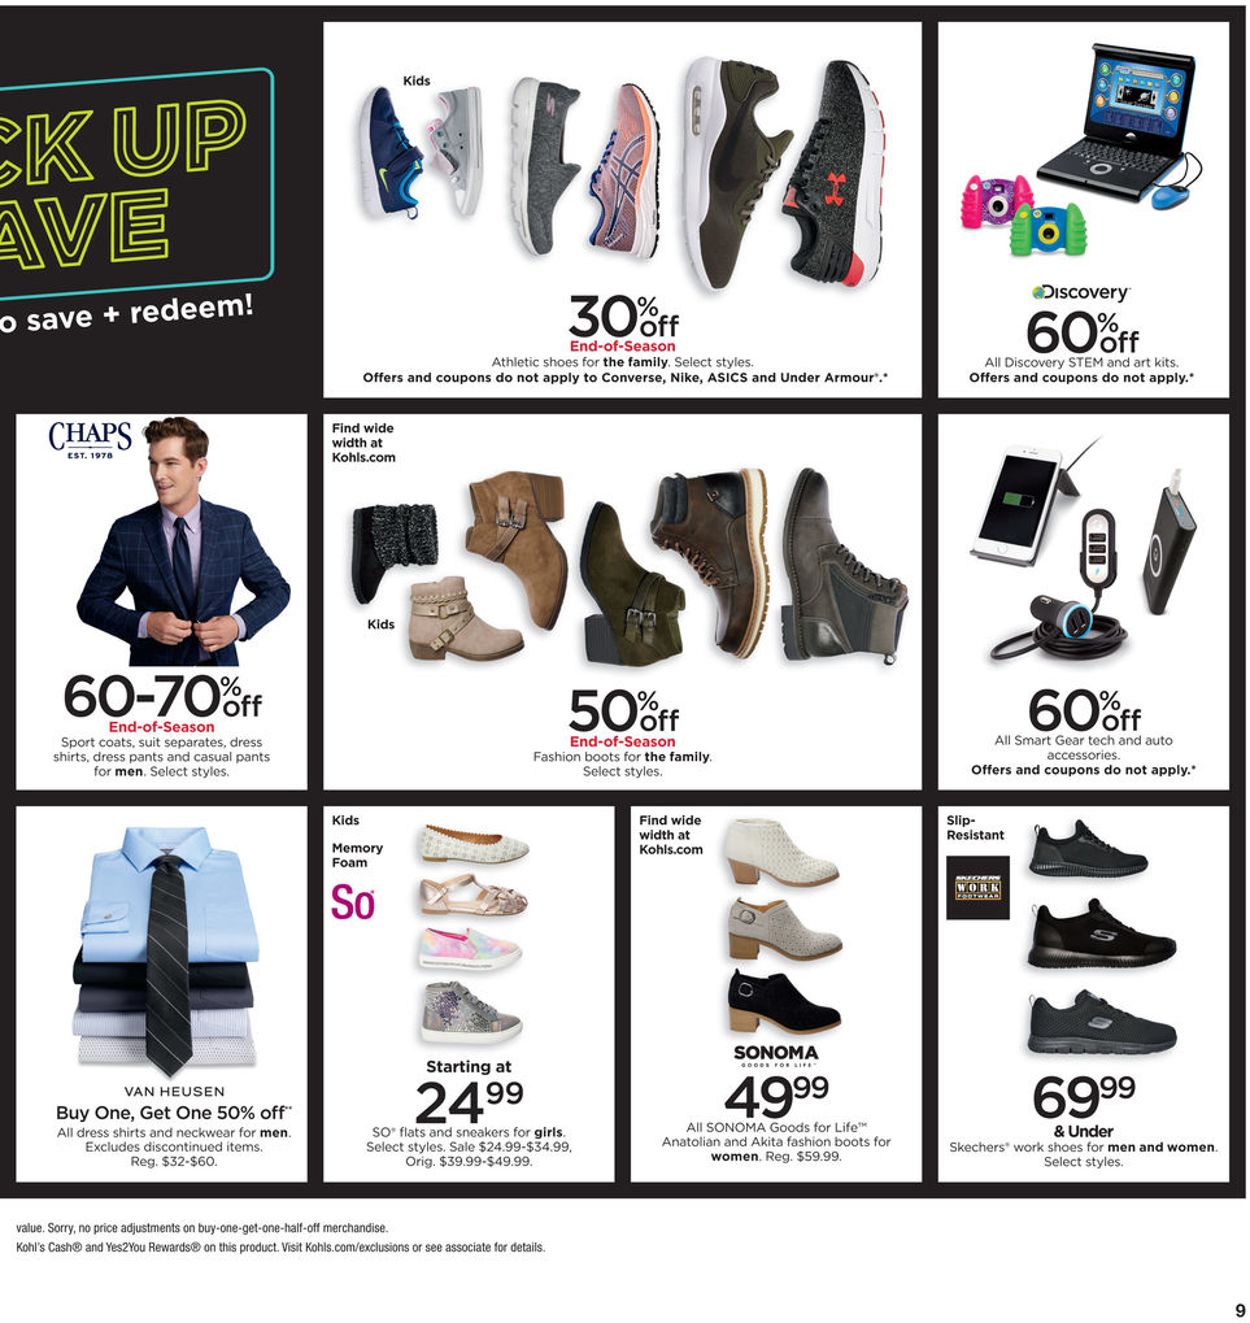 Kohl's Current weekly ad 12/26 - 12/31/2019 [9] - frequent-ads.com